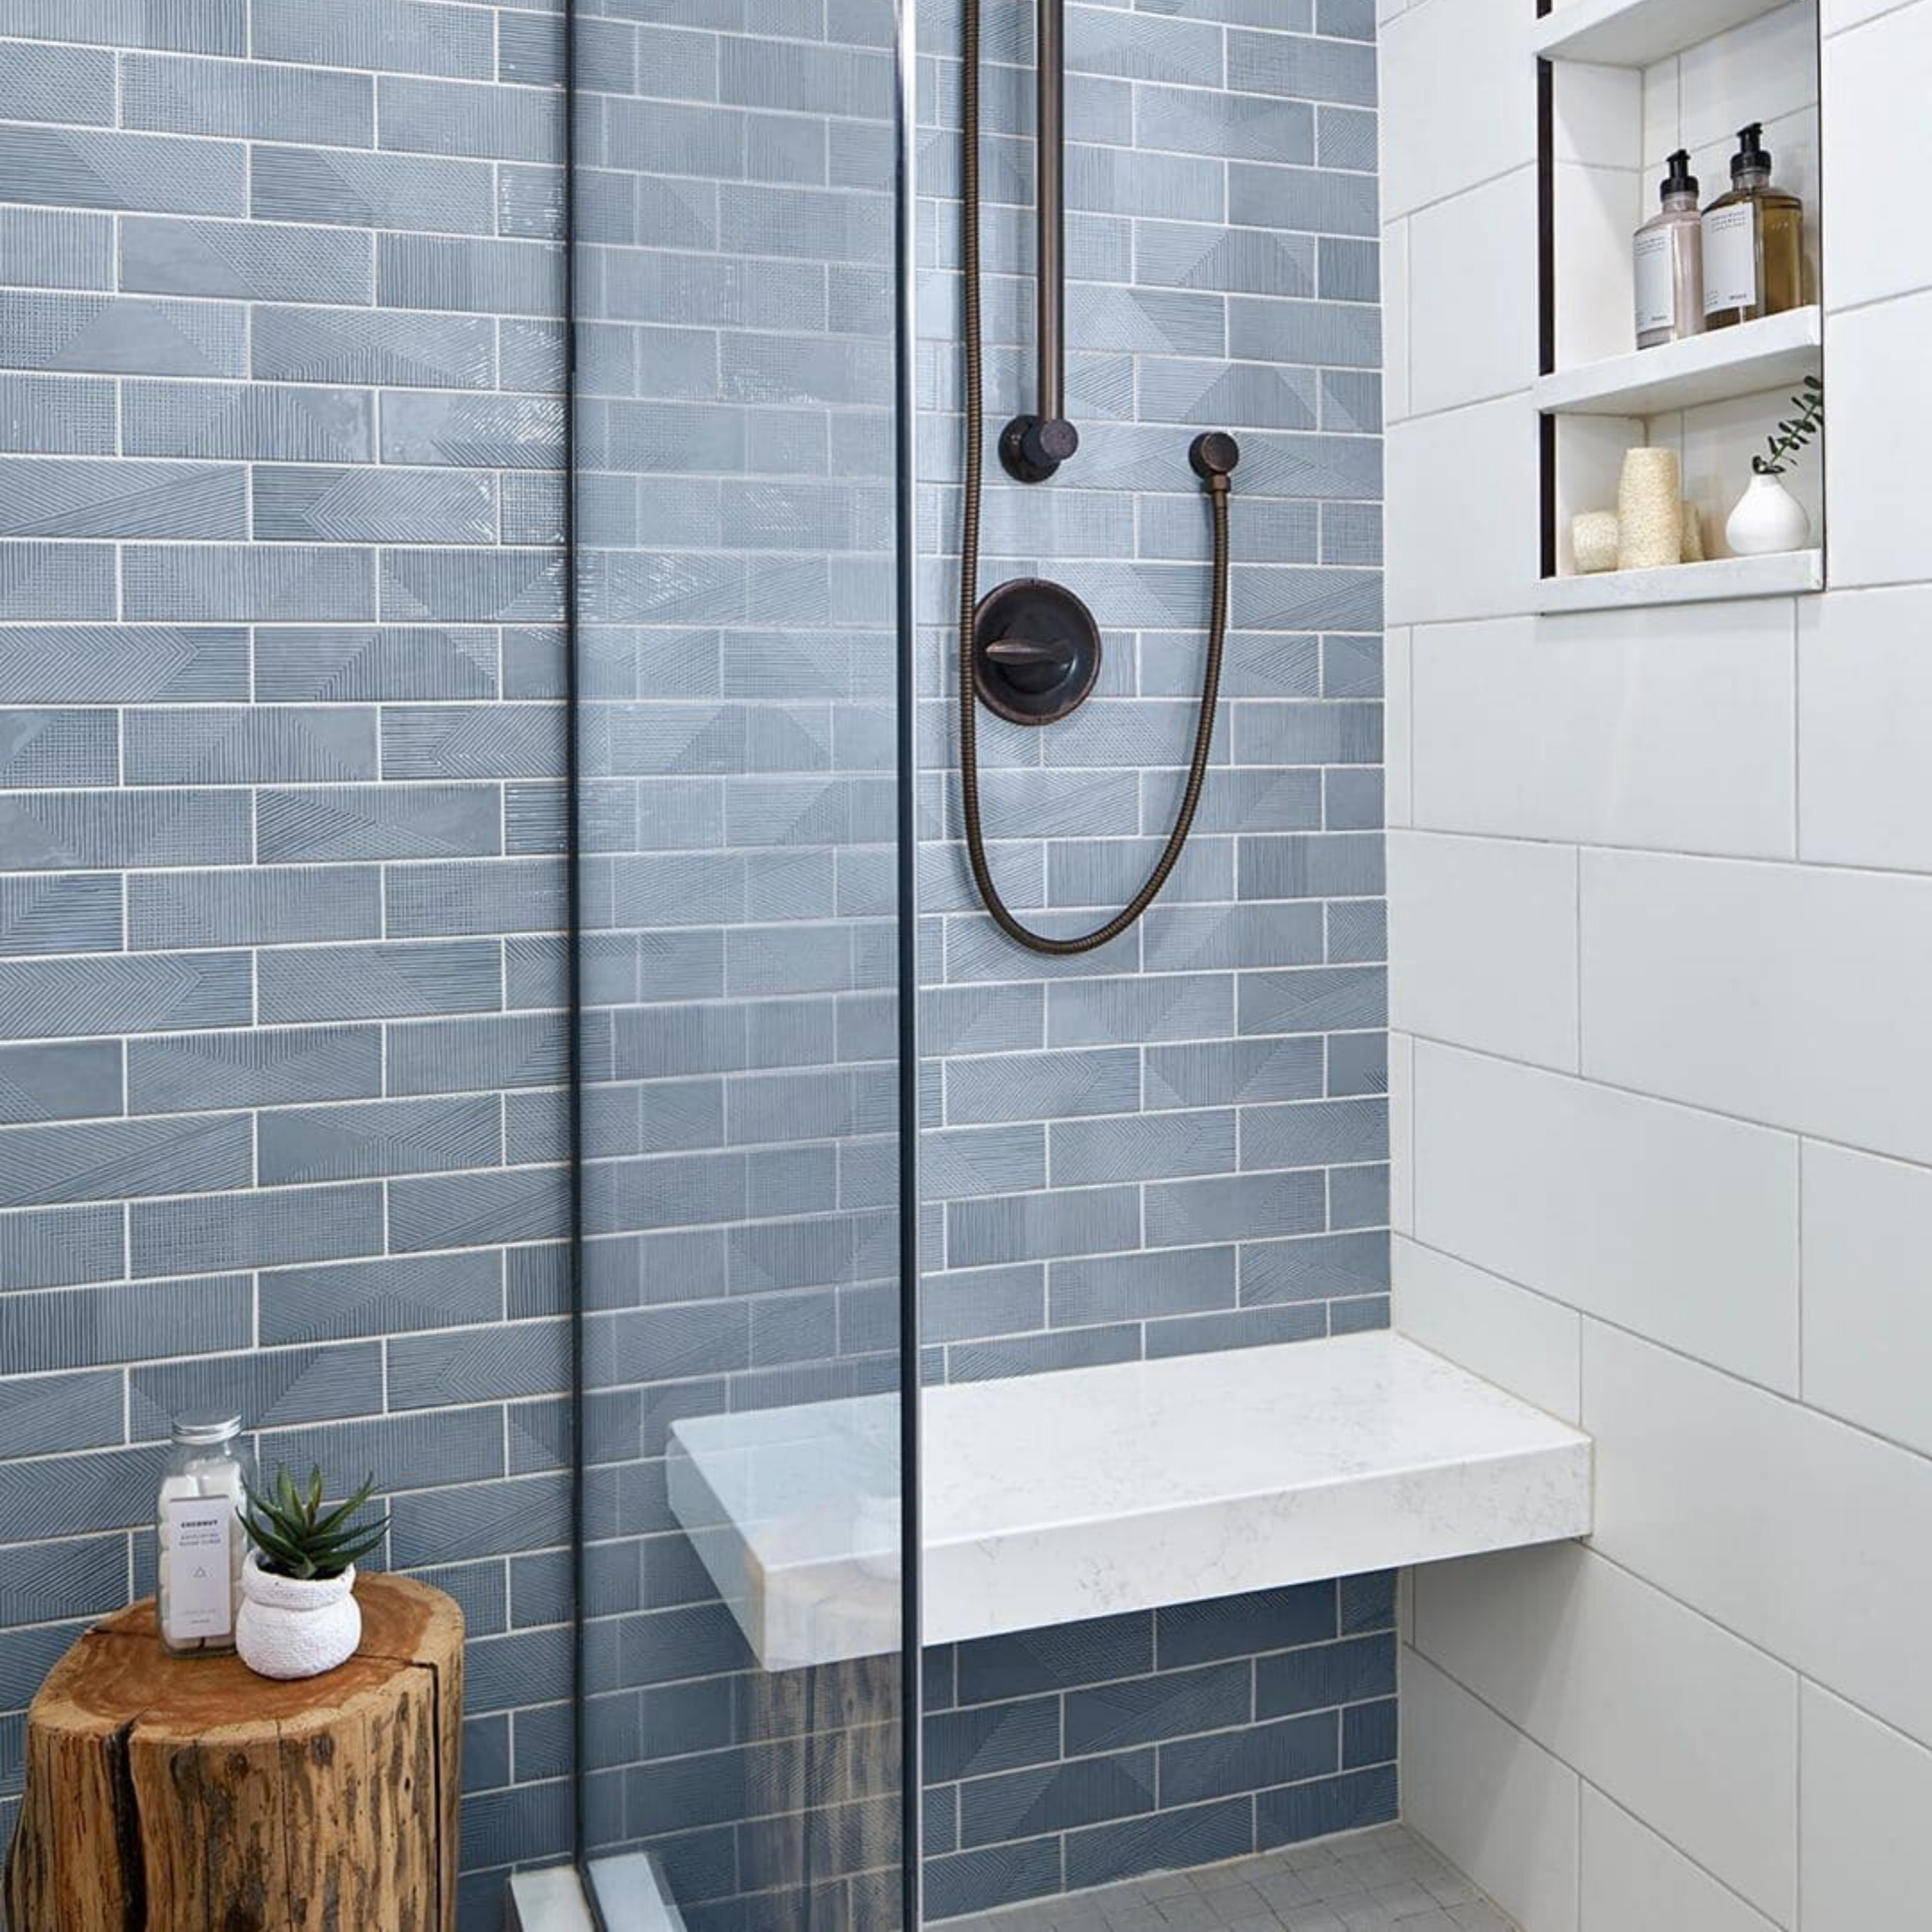 10 Walk In Shower Tile Ideas That Will, Bathroom Tile Shower Ideas Pictures